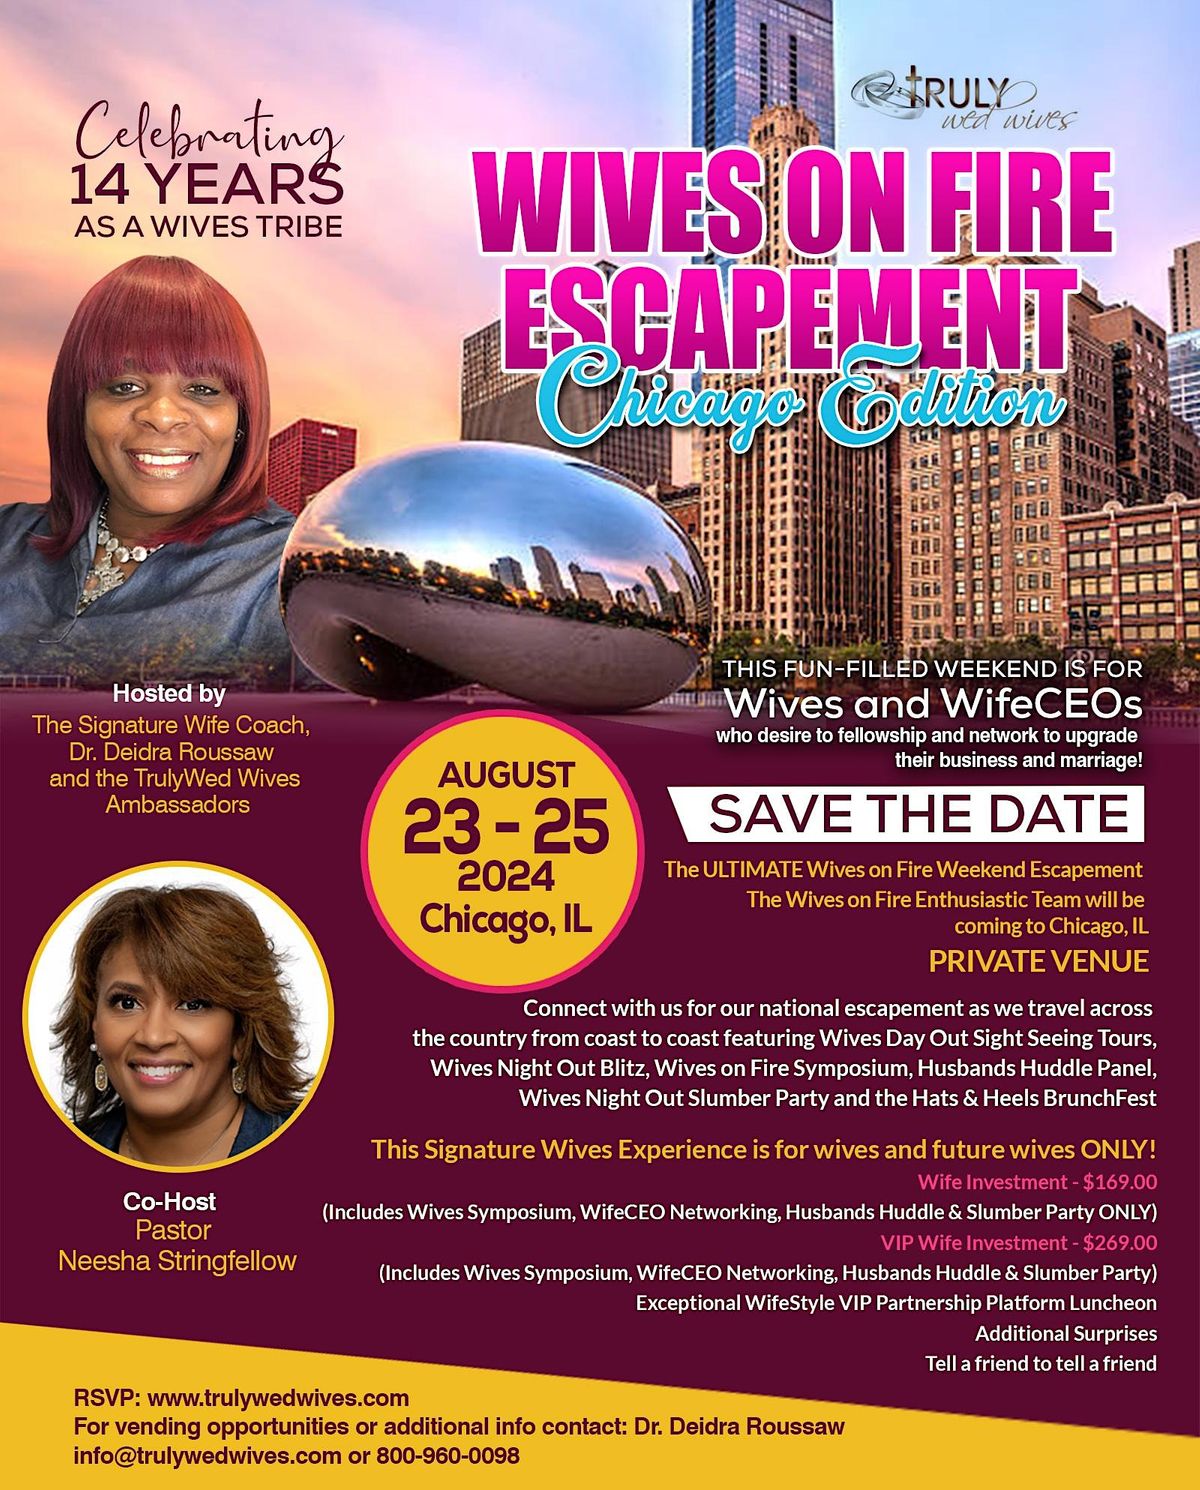 Wives on Fire Escapement (Chicago Edition)